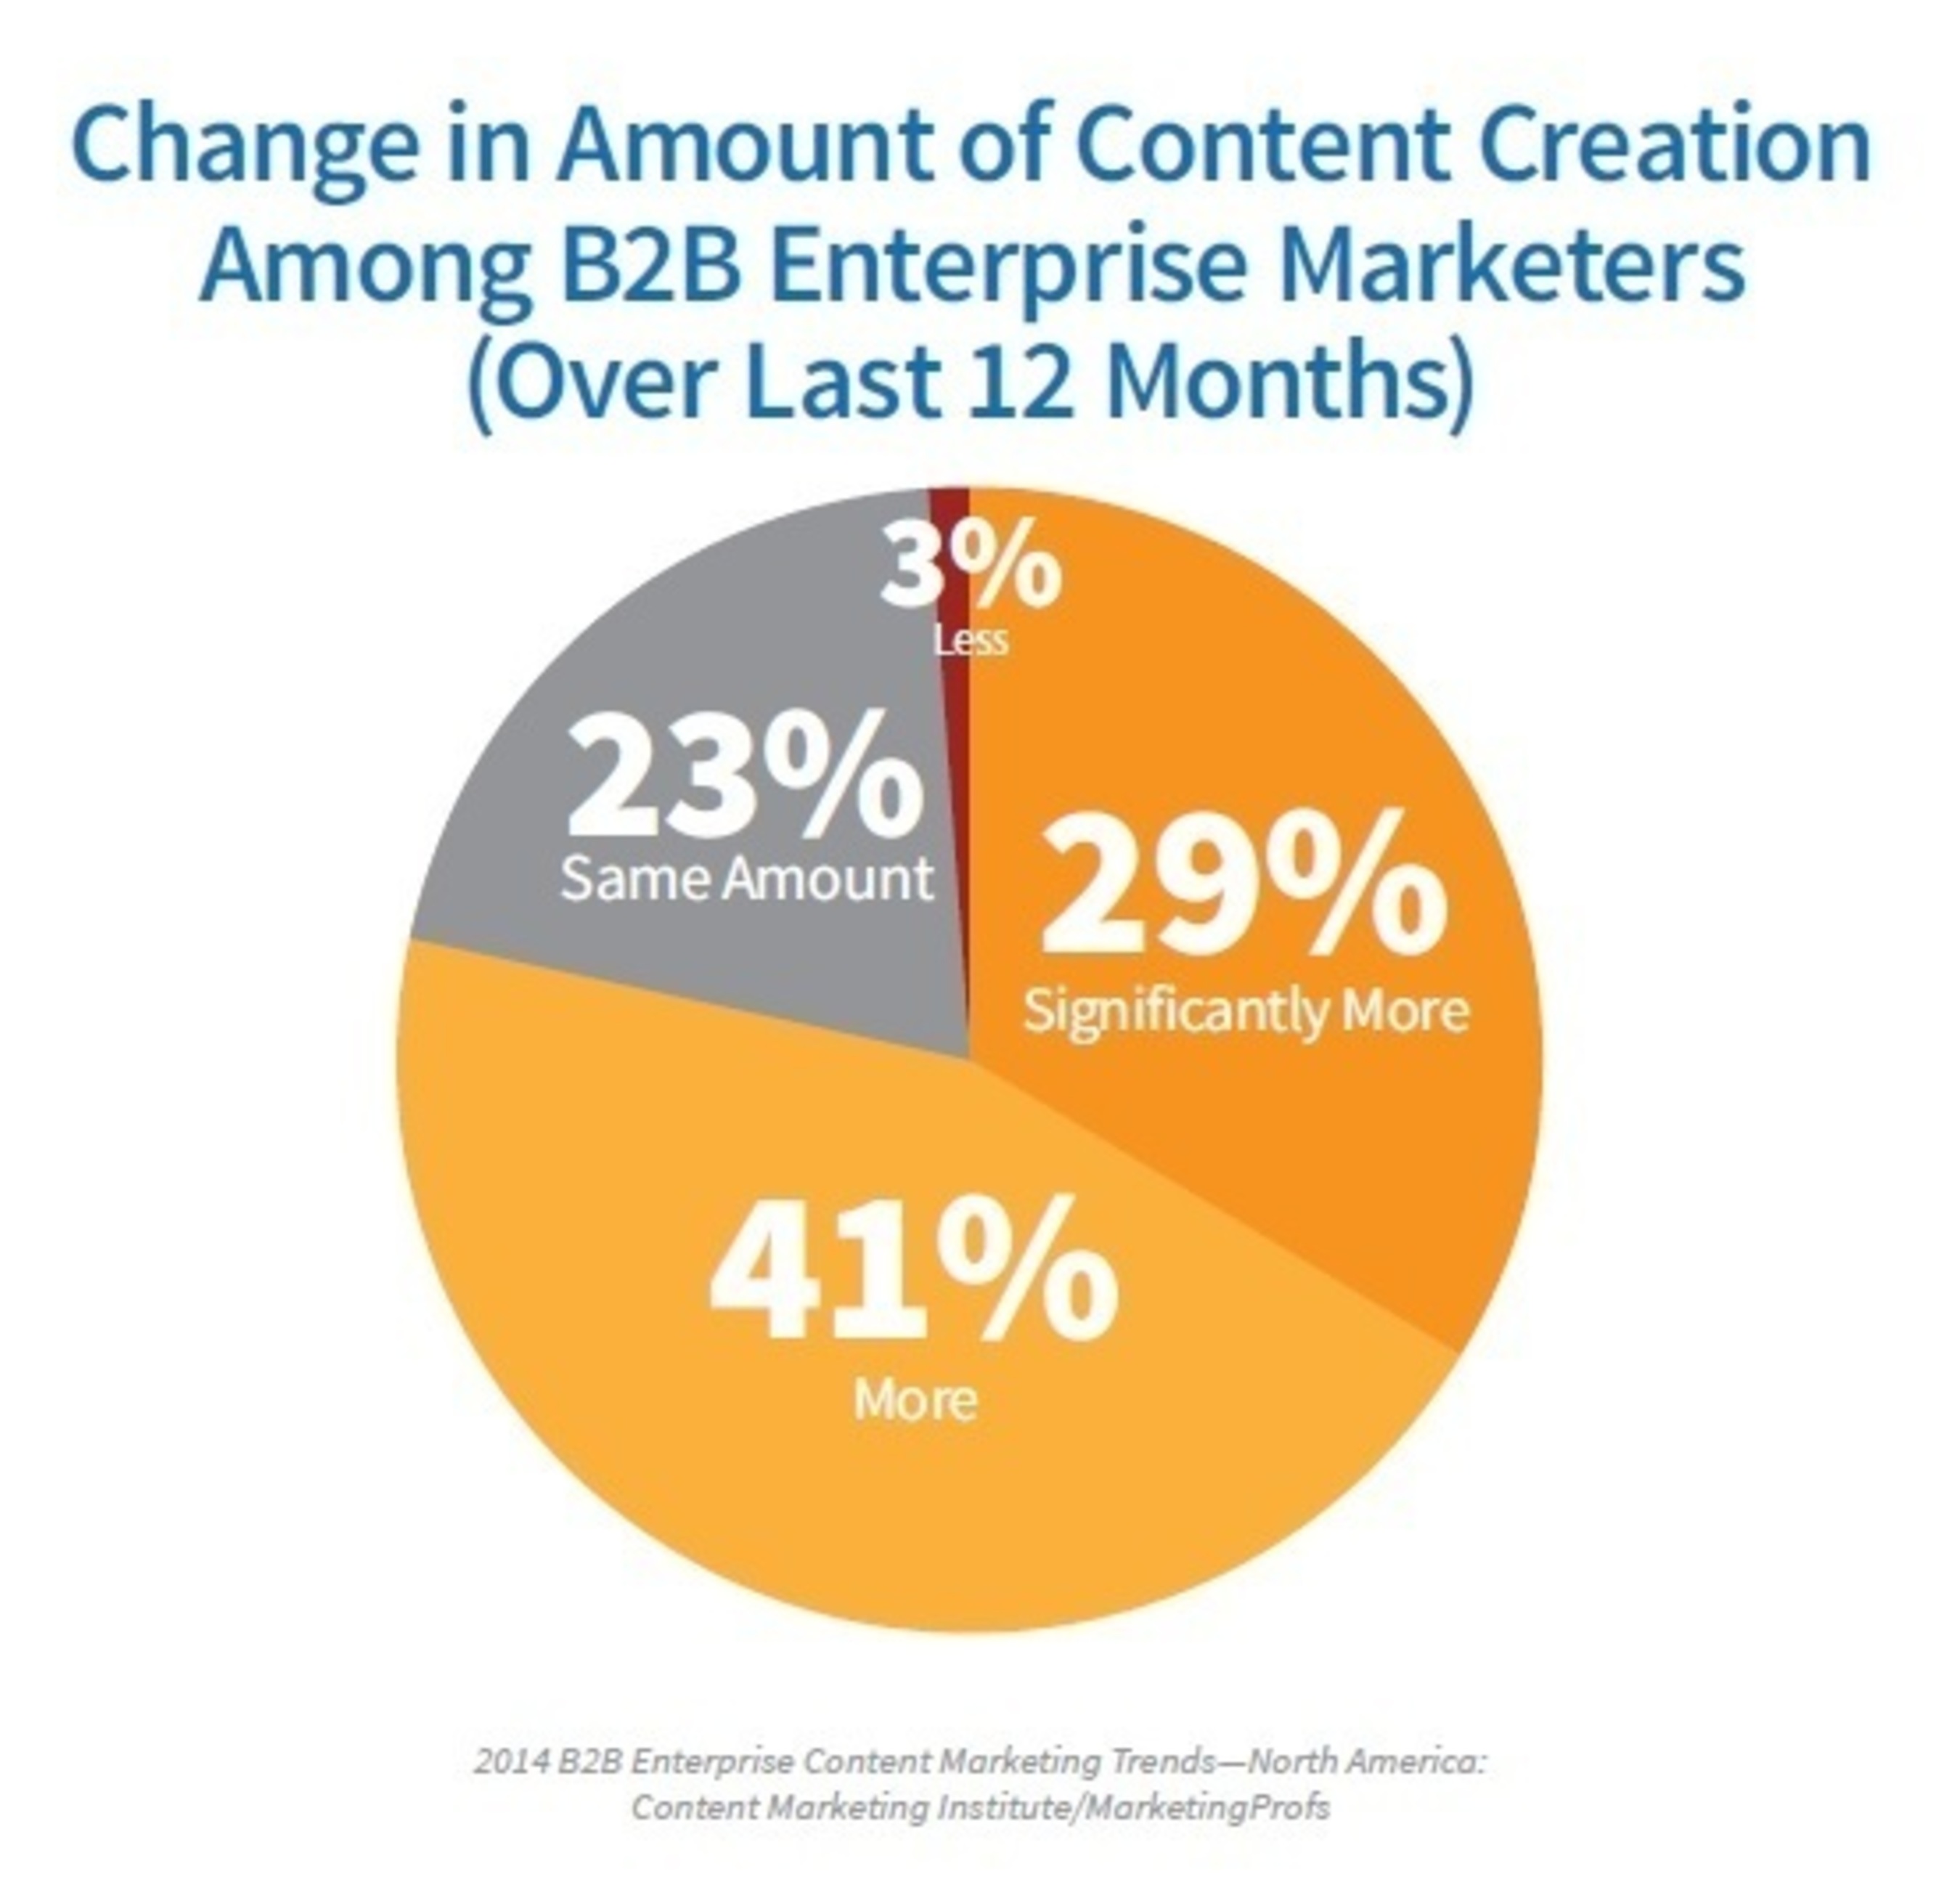 41% of B2B Enterprise Marketers have increased the amount of content creation over the last 12 months.  (PRNewsFoto/Content Marketing Institute)